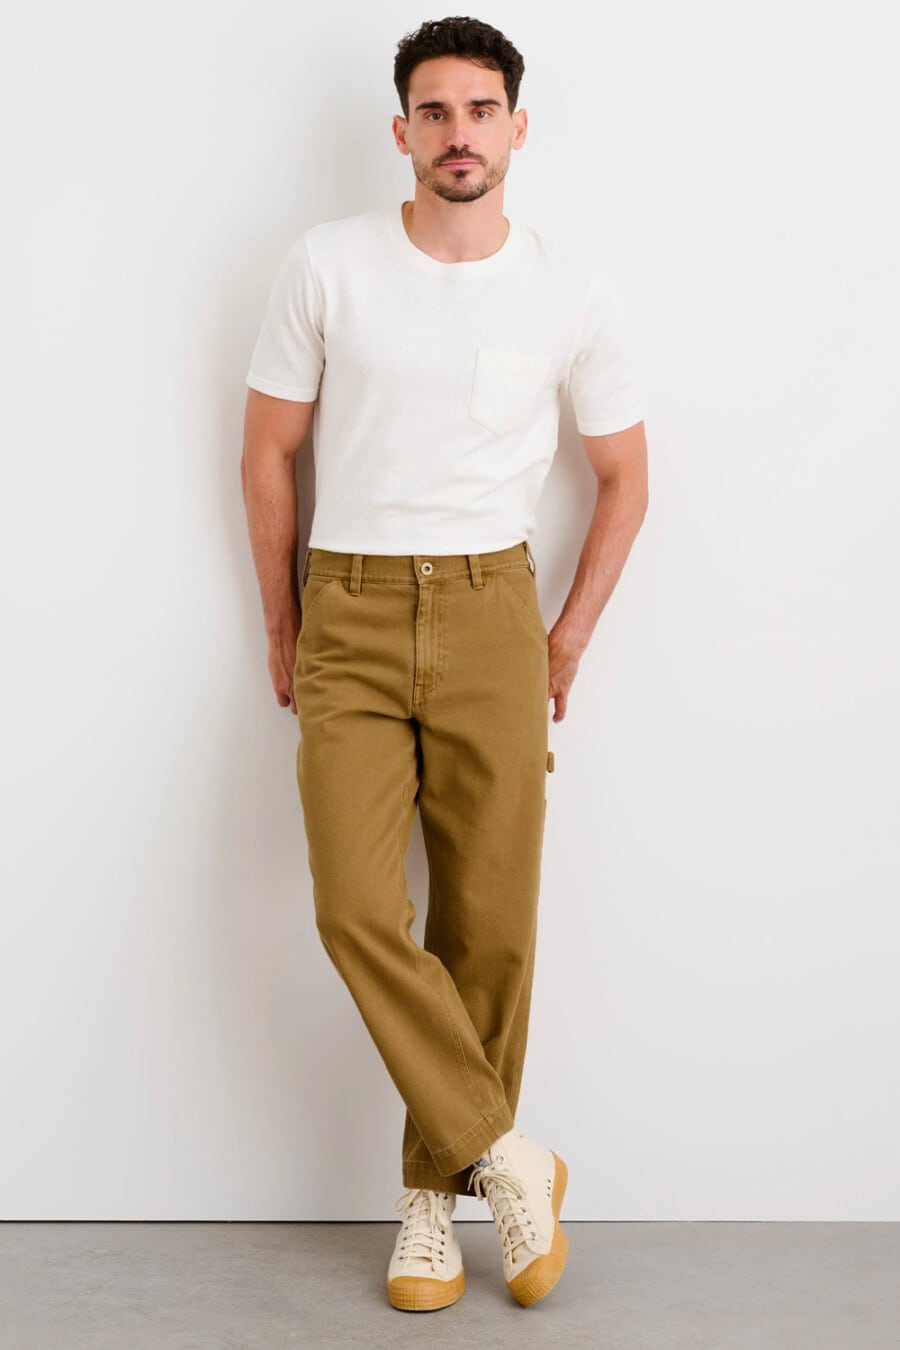 Men's khaki carpenter pants, tucked in white T-shirt and canvas gum sole high-top sneakers outfit